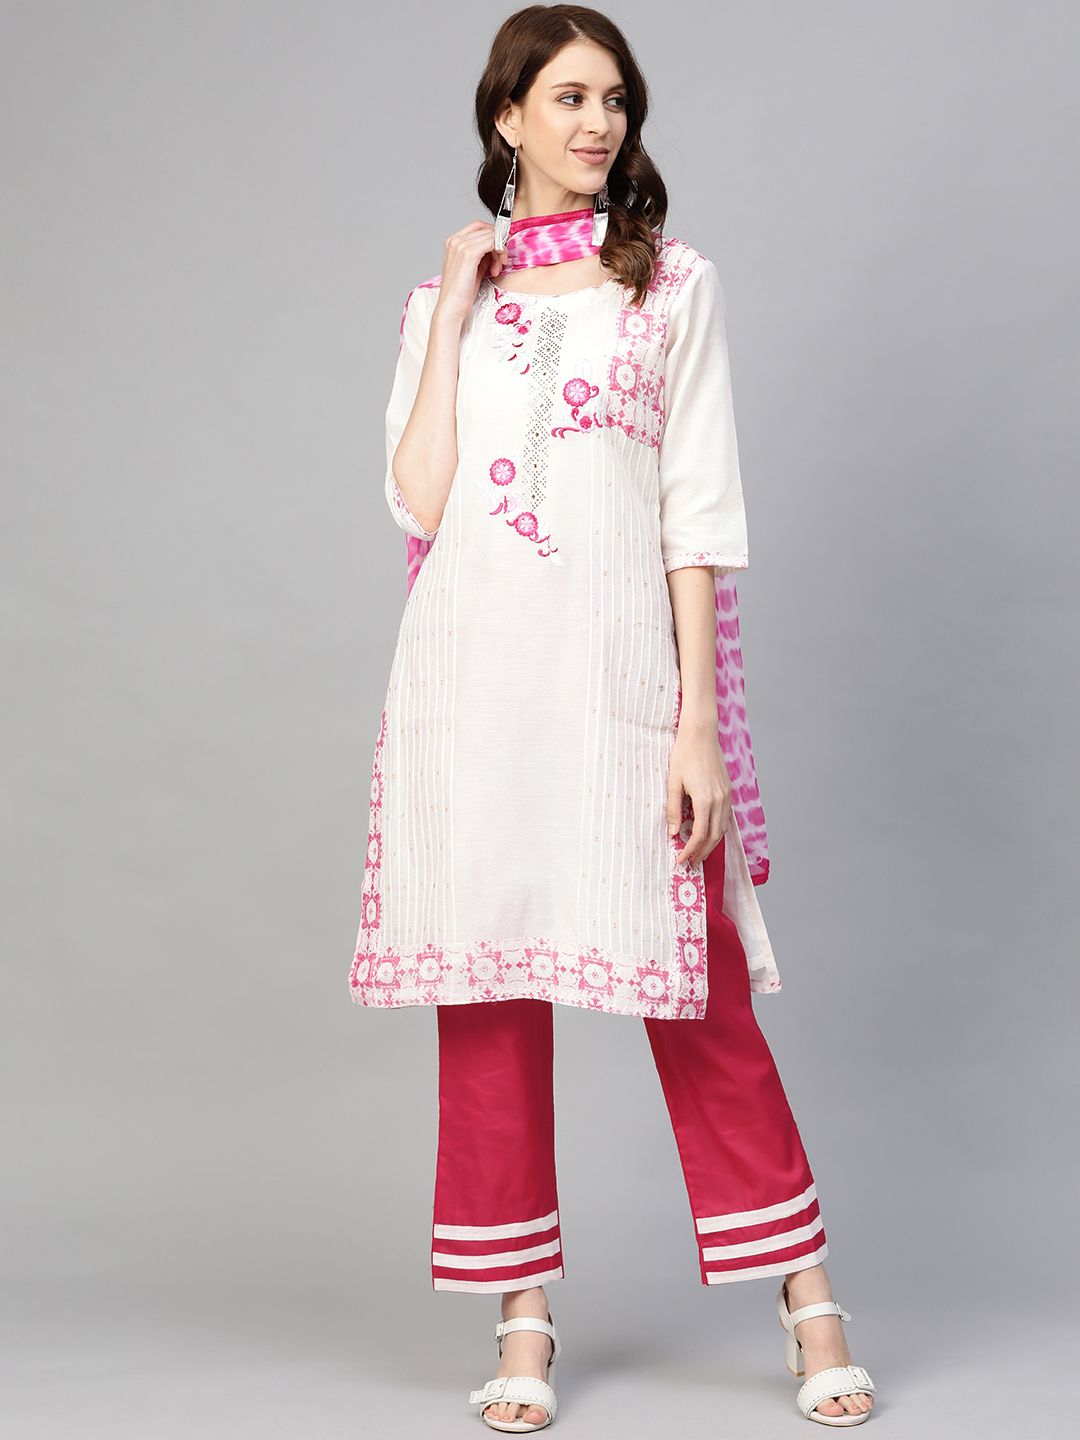 Readiprint Fashions Off-White & Pink Embroidered Unstitched Dress Material Price in India